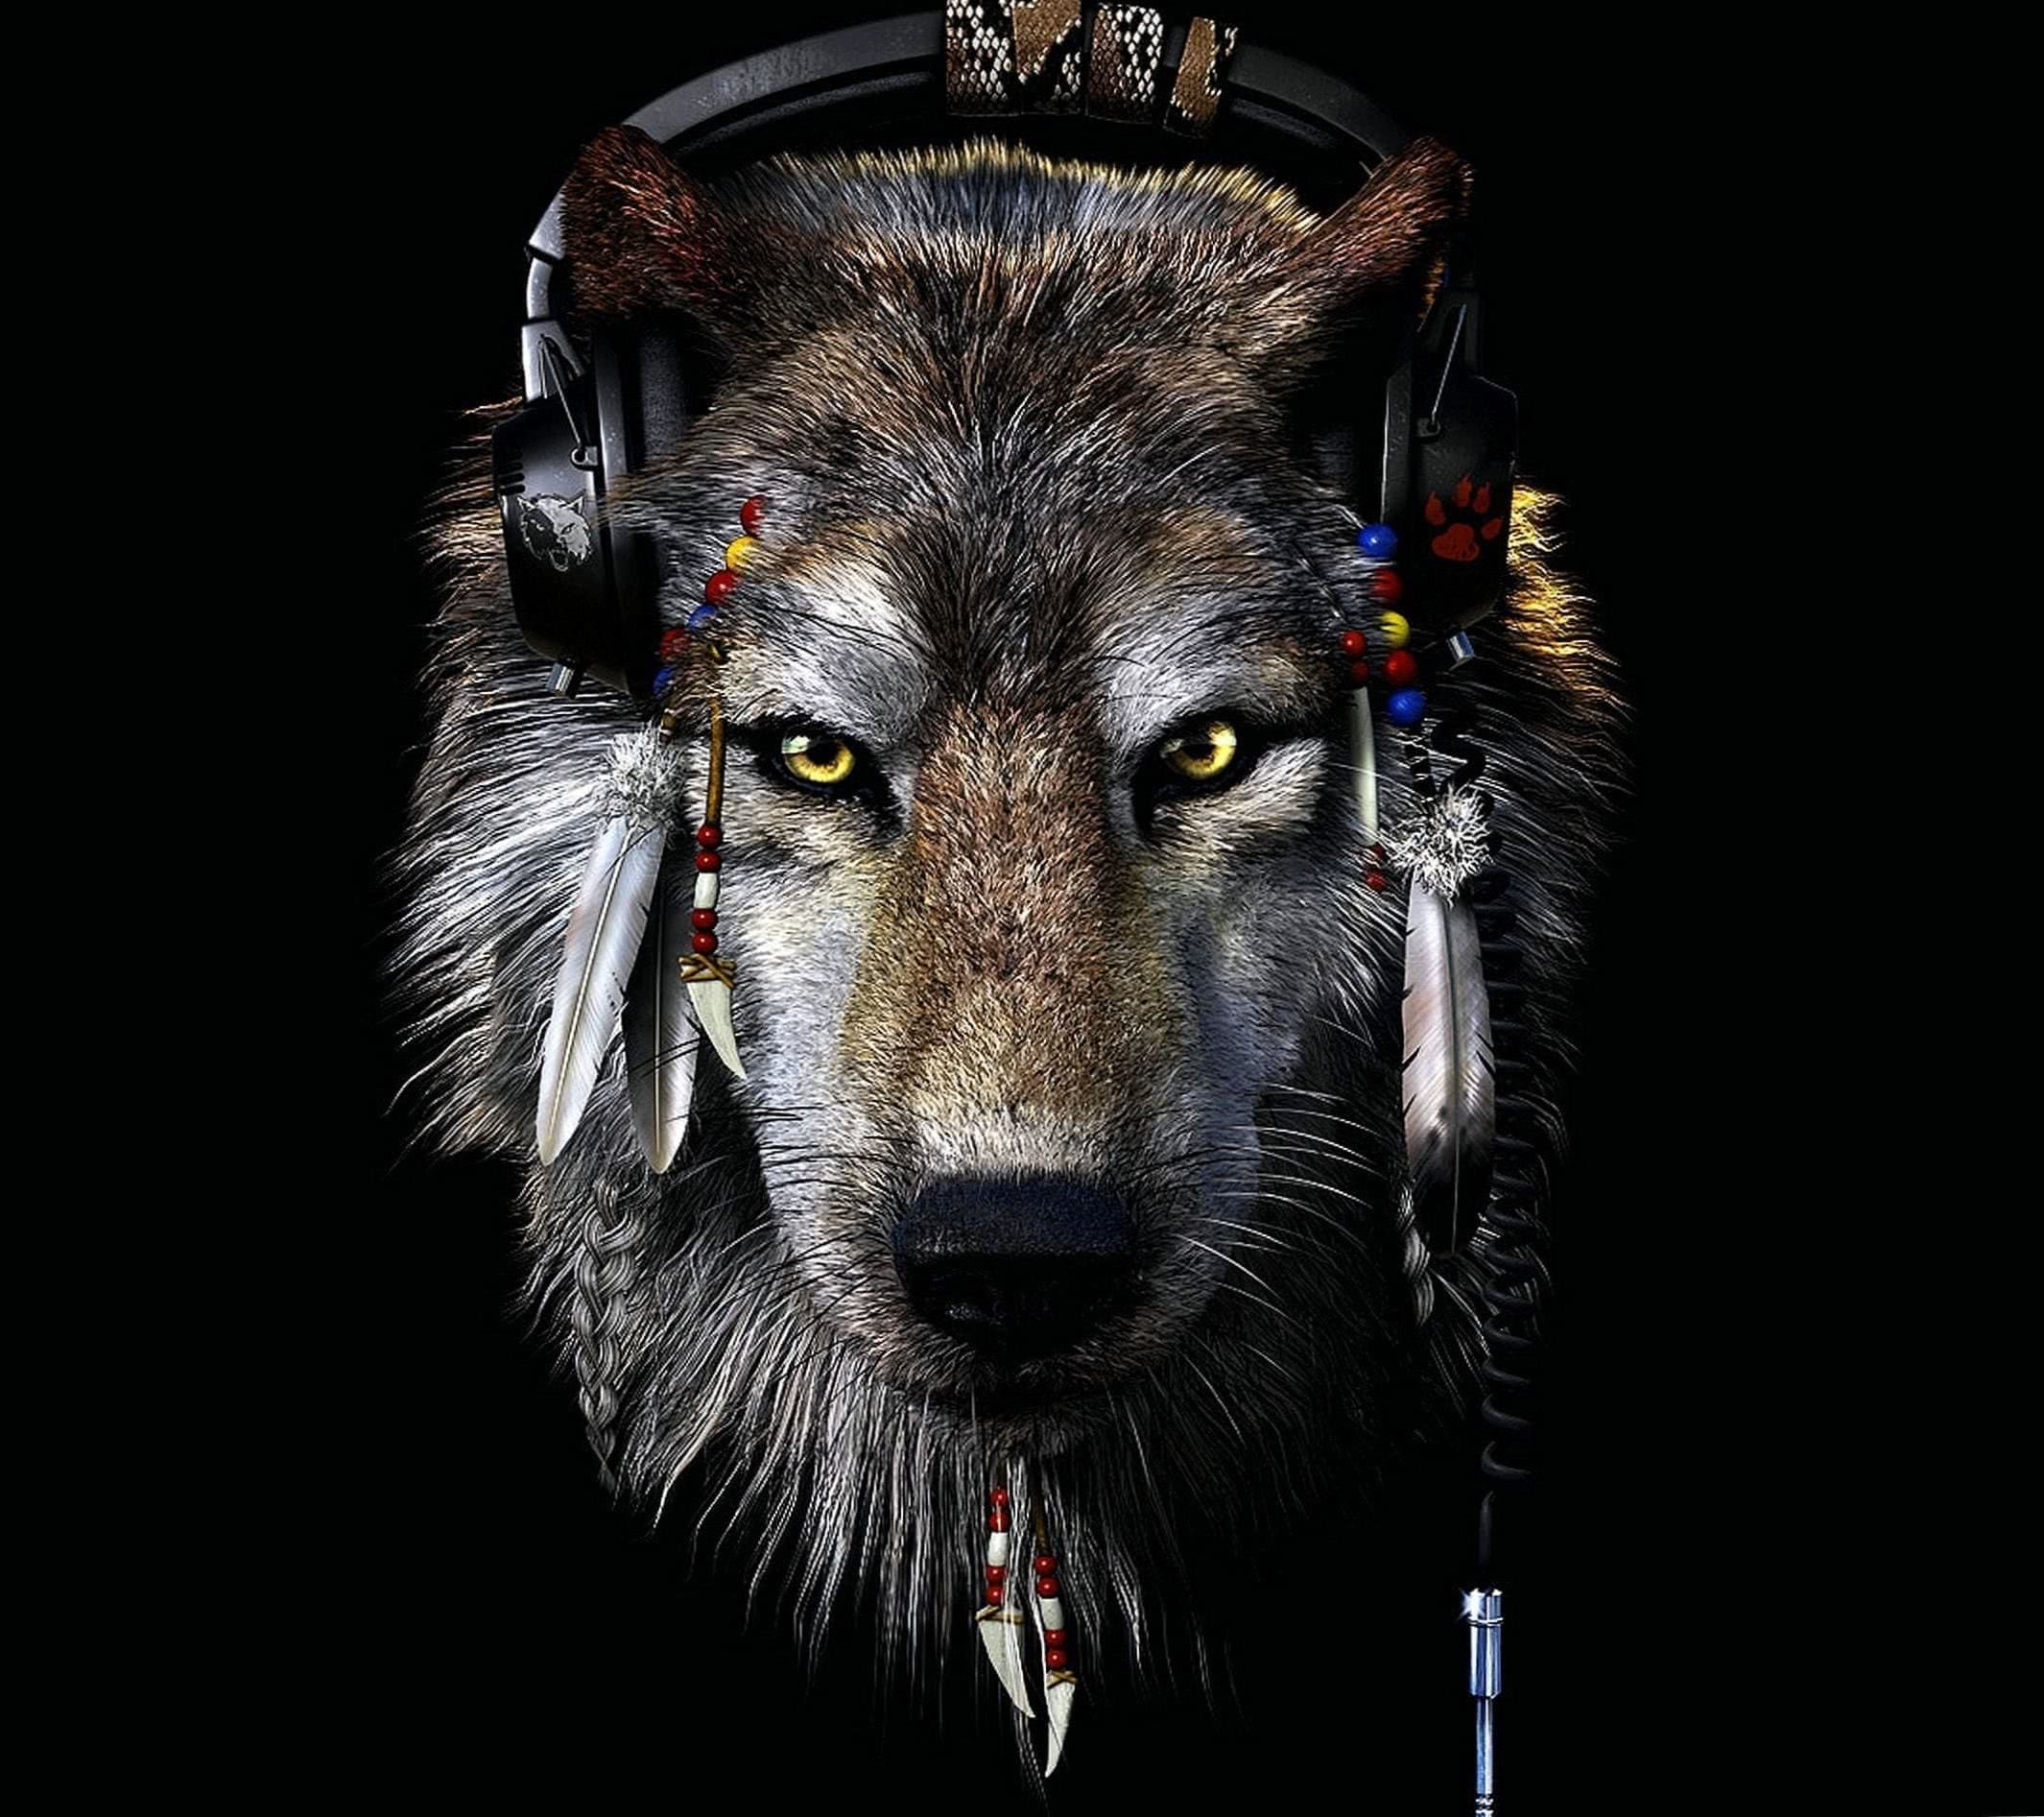 Cool HD Wallpapers Wolf